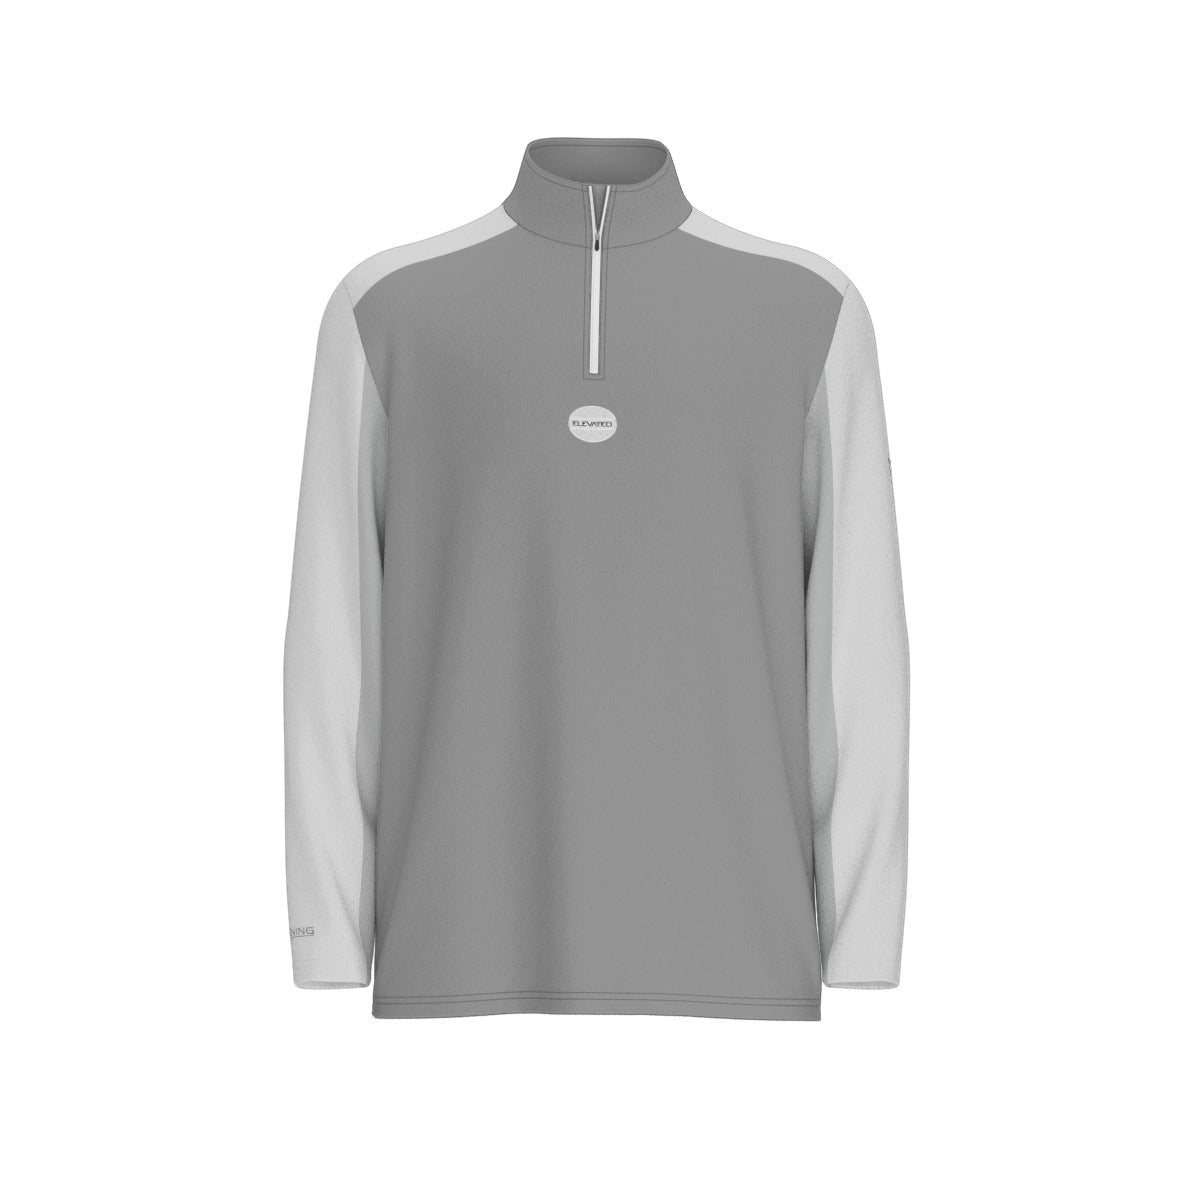 Elevated Athletic stand up quarter zip